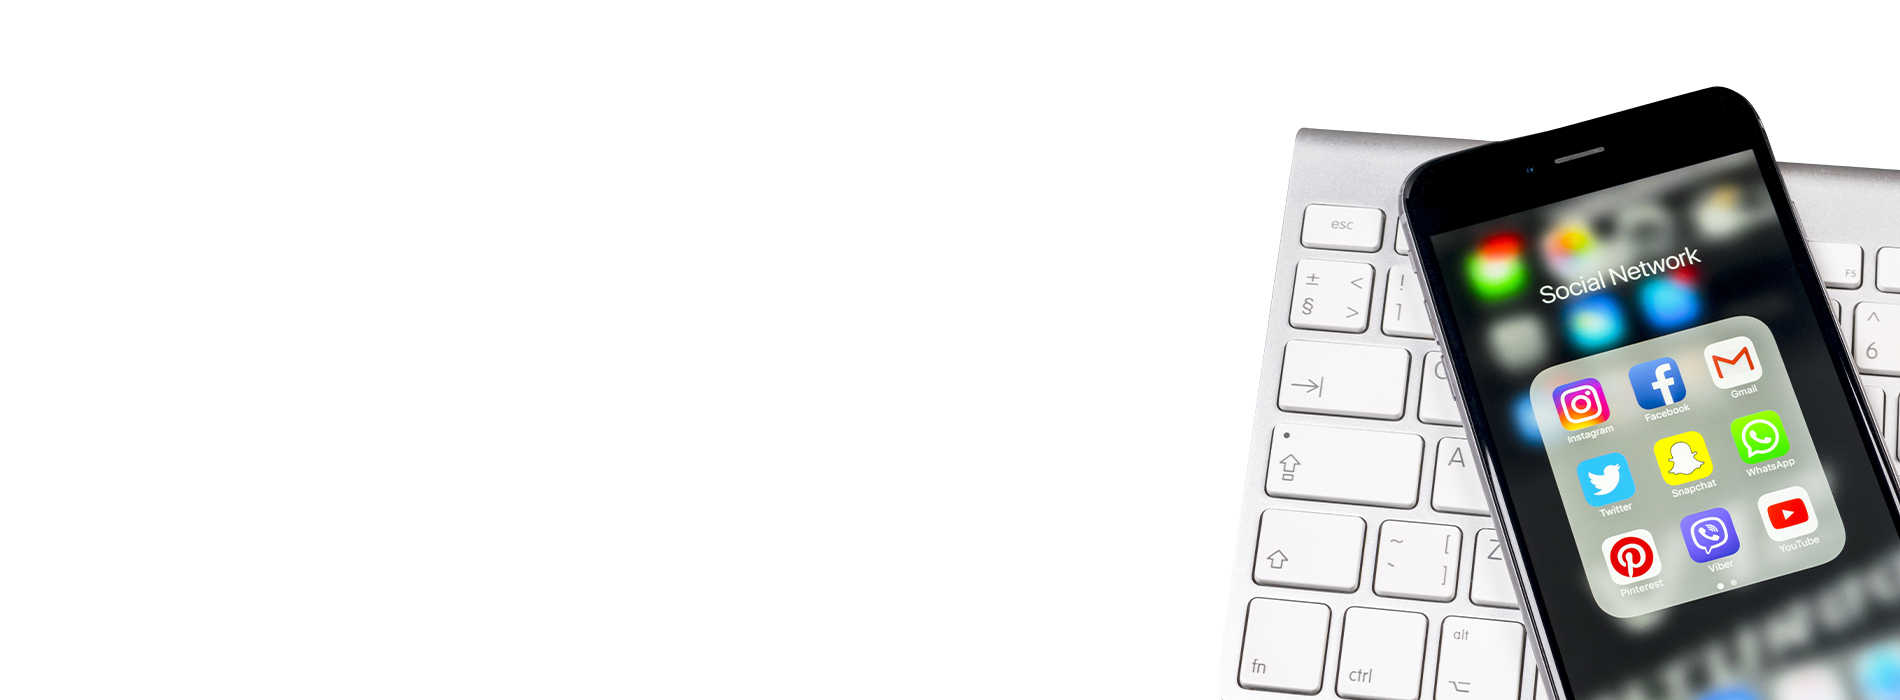 The image shows a smartphone placed on top of a computer keyboard, with both devices in focus against a blurred background.